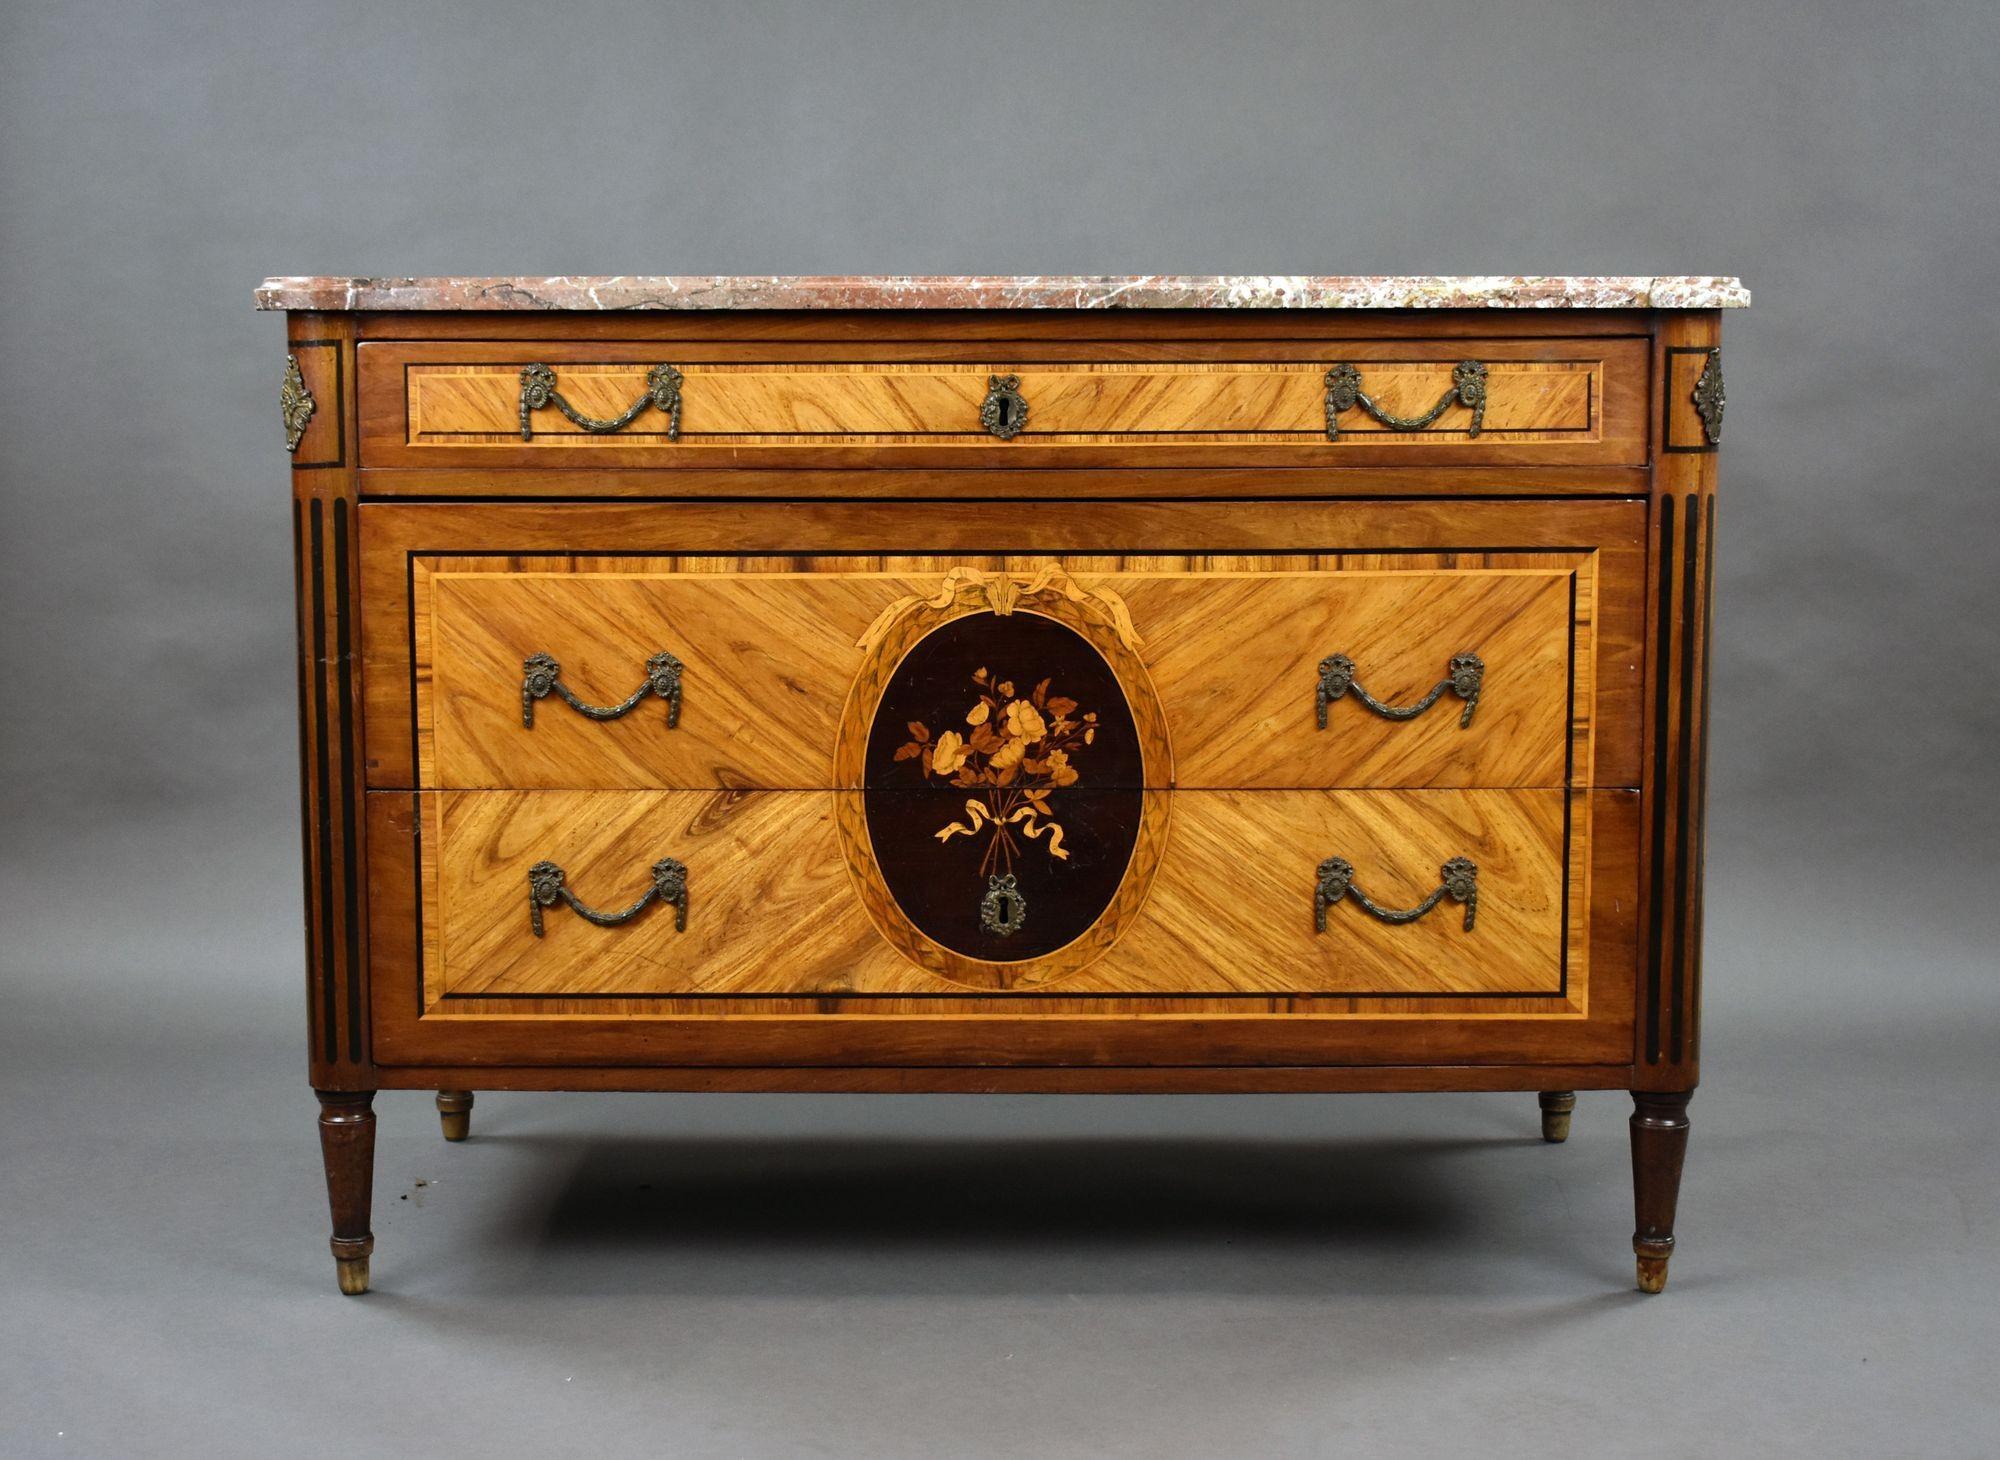 For sale is a fine quality 18th century French marble topped commode, having fine kingwood veneers, the commode has an arrangement of three drawers, each with ornate brass handles, the bottom two drawers are intricately inlaid with various woods.